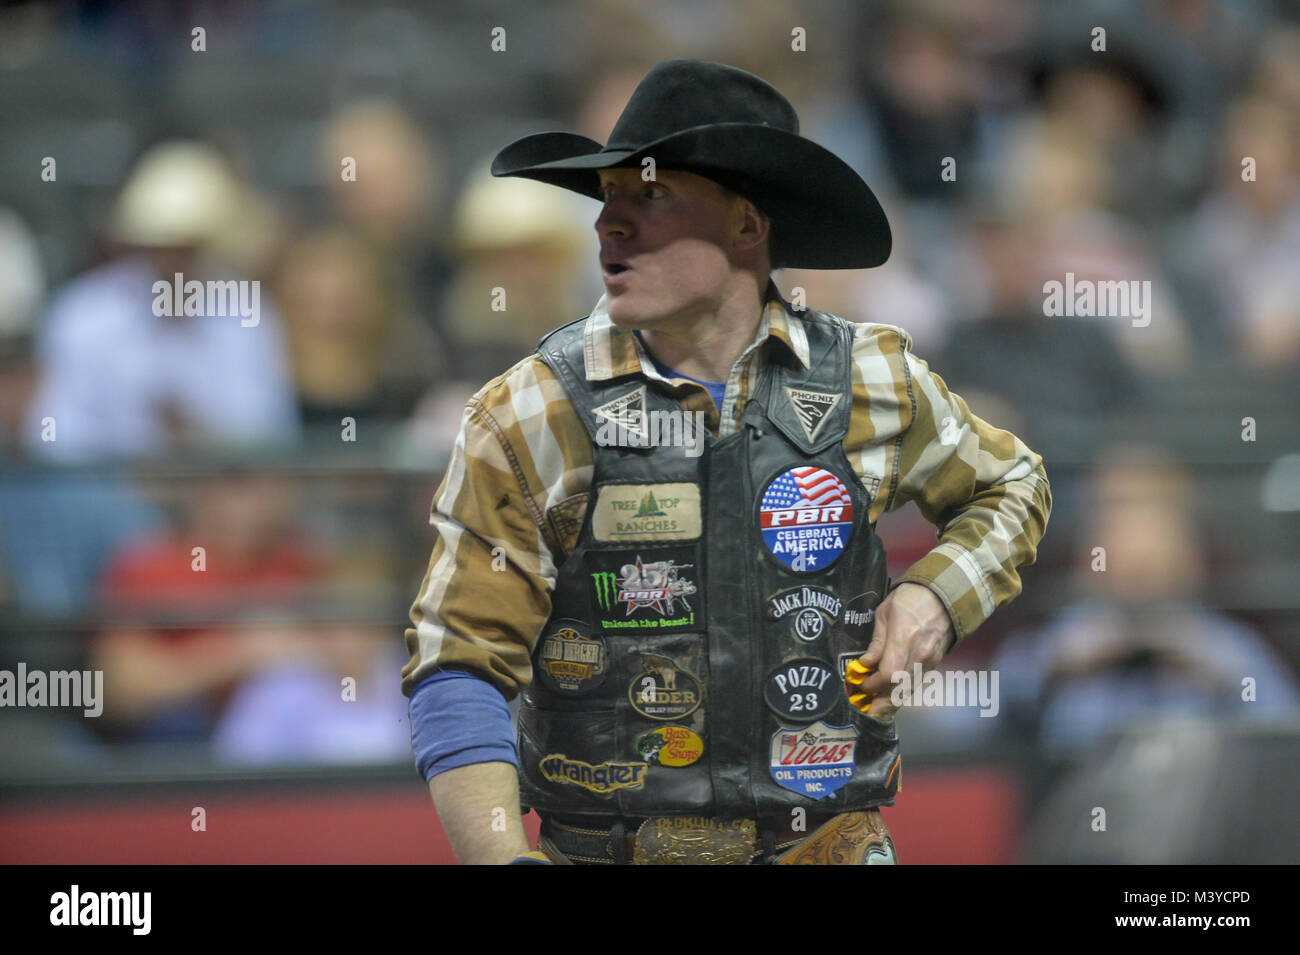 Kansas City, Missouri, USA. 11th Feb, 2018. CODY CAMPBELL looks back at the scoreboard following his ride during the second day of competition of the PBR Caterpillar Classic held at the Sprint Center in Kansas City, Missouri. Credit: Amy Sanderson/ZUMA Wire/Alamy Live News Stock Photo